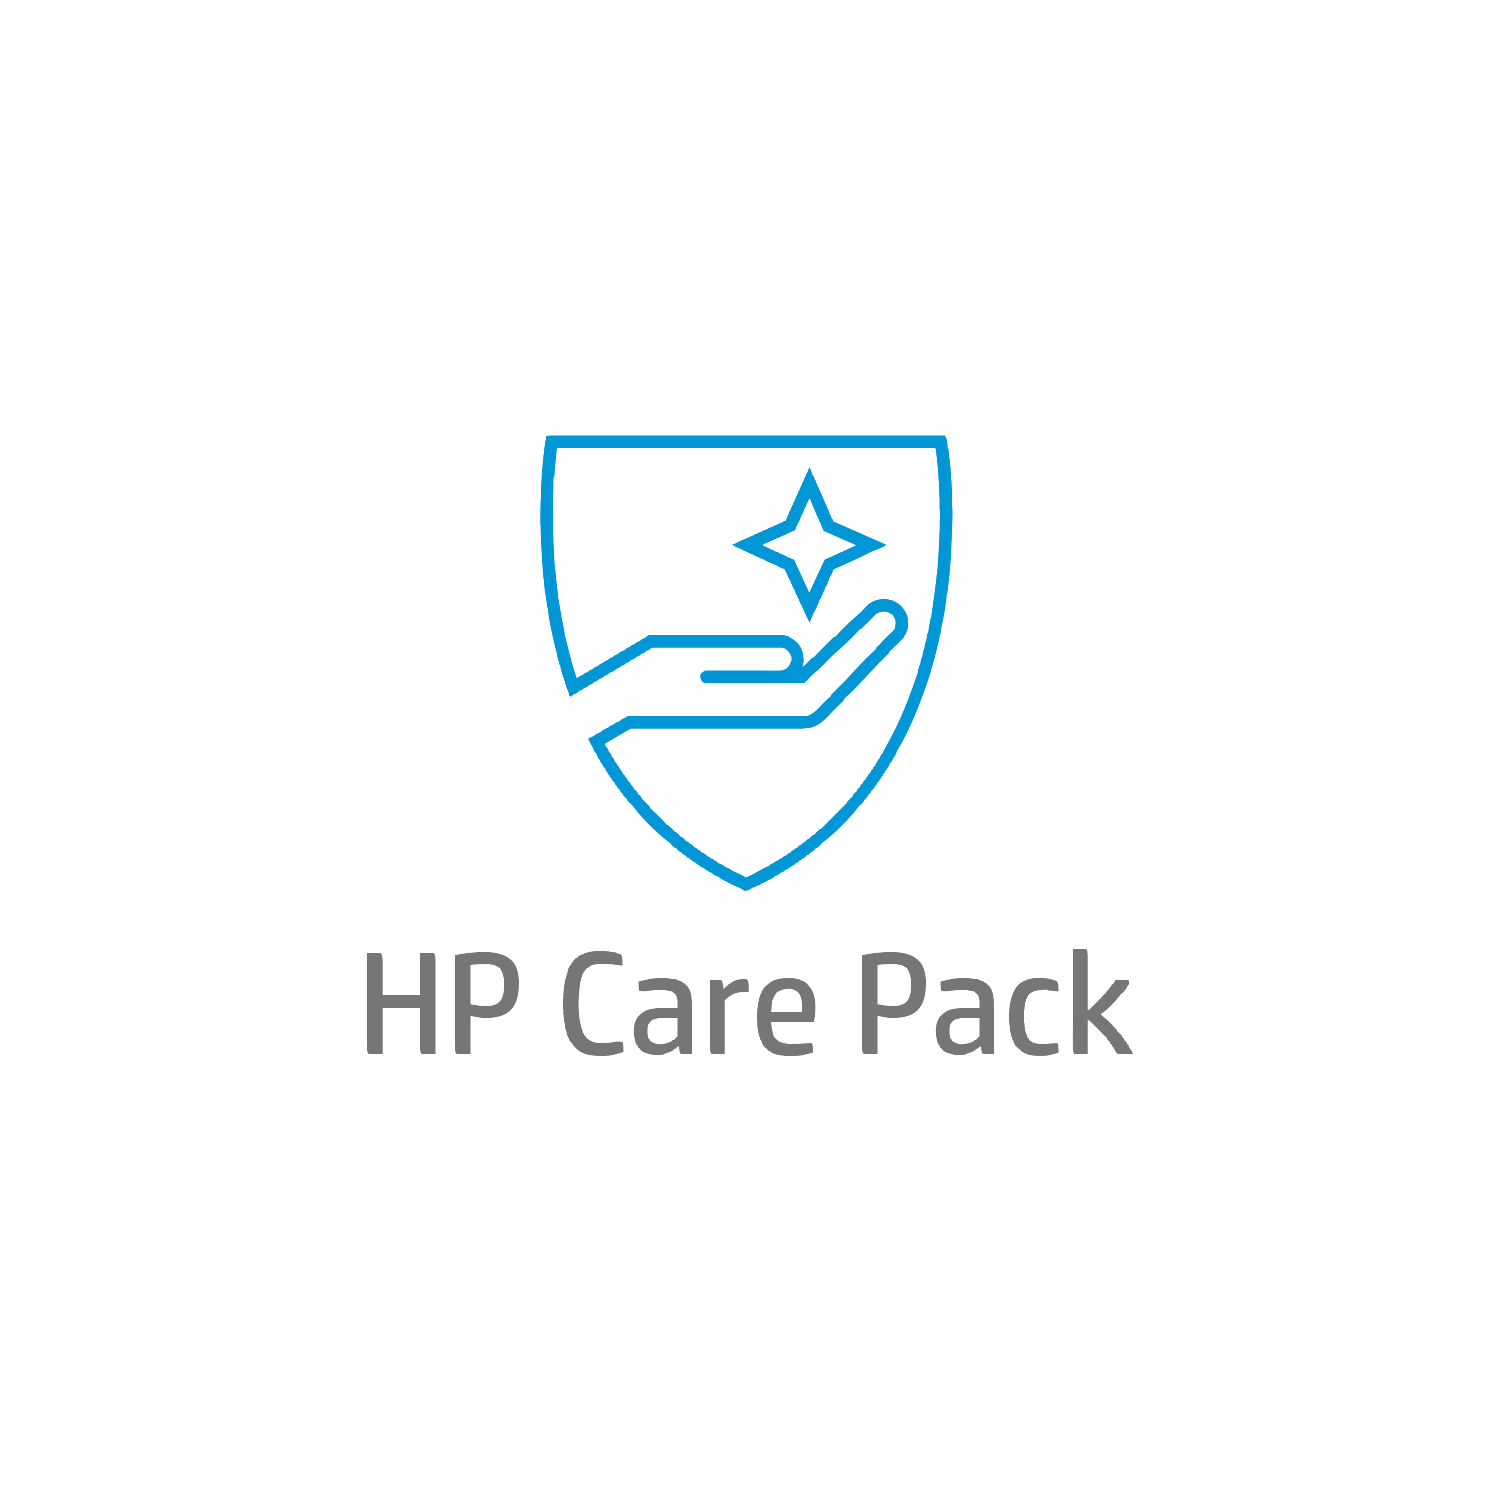 Bild von HP Electronic HP Care Pack Next Business Day Hardware Support with Defective Media